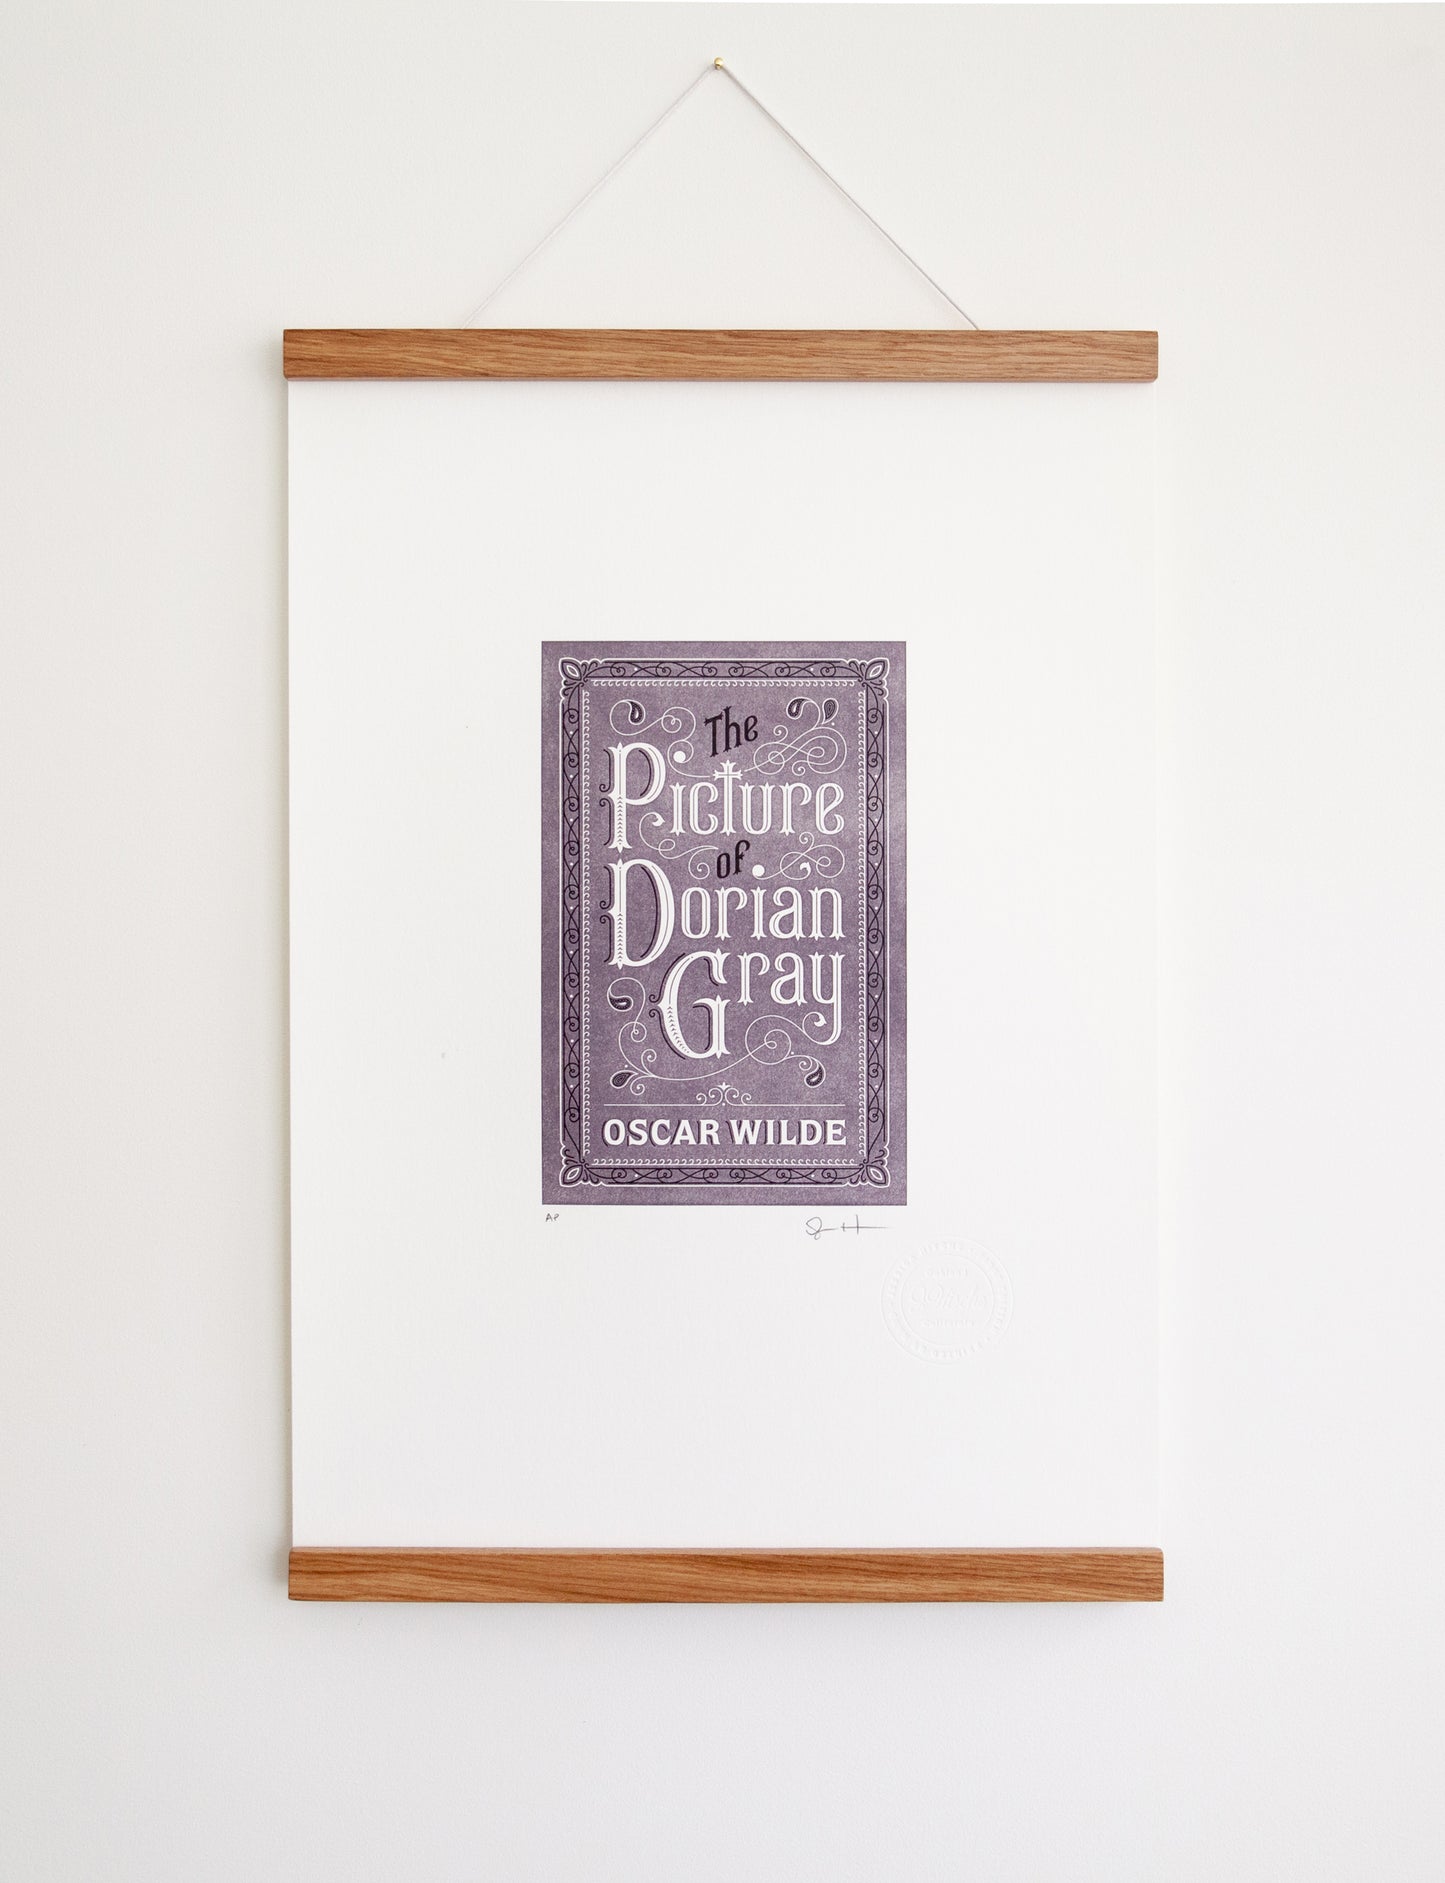 Framed 2-color letterpress print in violet and black. Printed artwork is an illustrated book cover of The Picture of Dorian Gray including custom hand lettering.